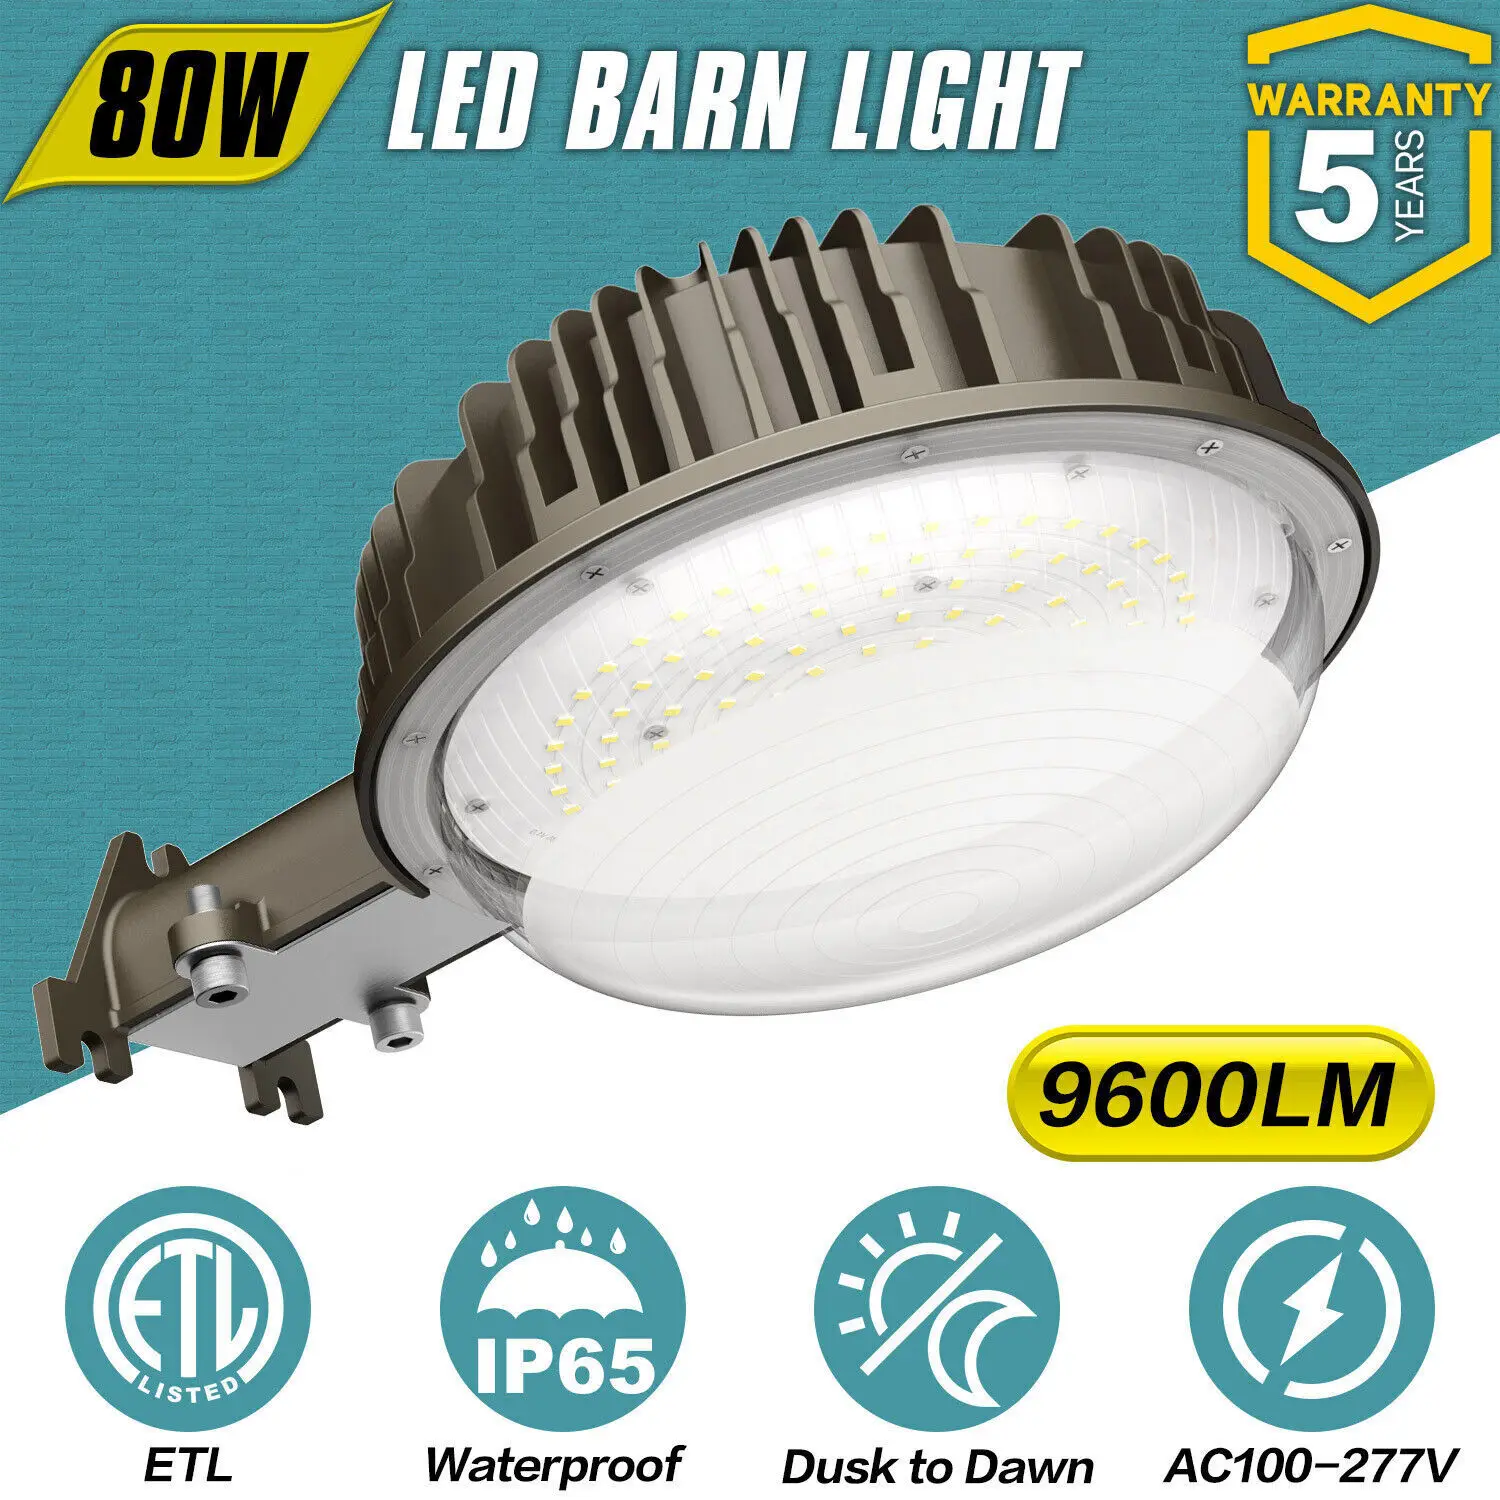 LED Barn Light, 80W Dusk to Dawn Outdoor Light 5000K Daylight 9600LM IP65 Waterproof Yard Lights with Photocell for Barn Garage